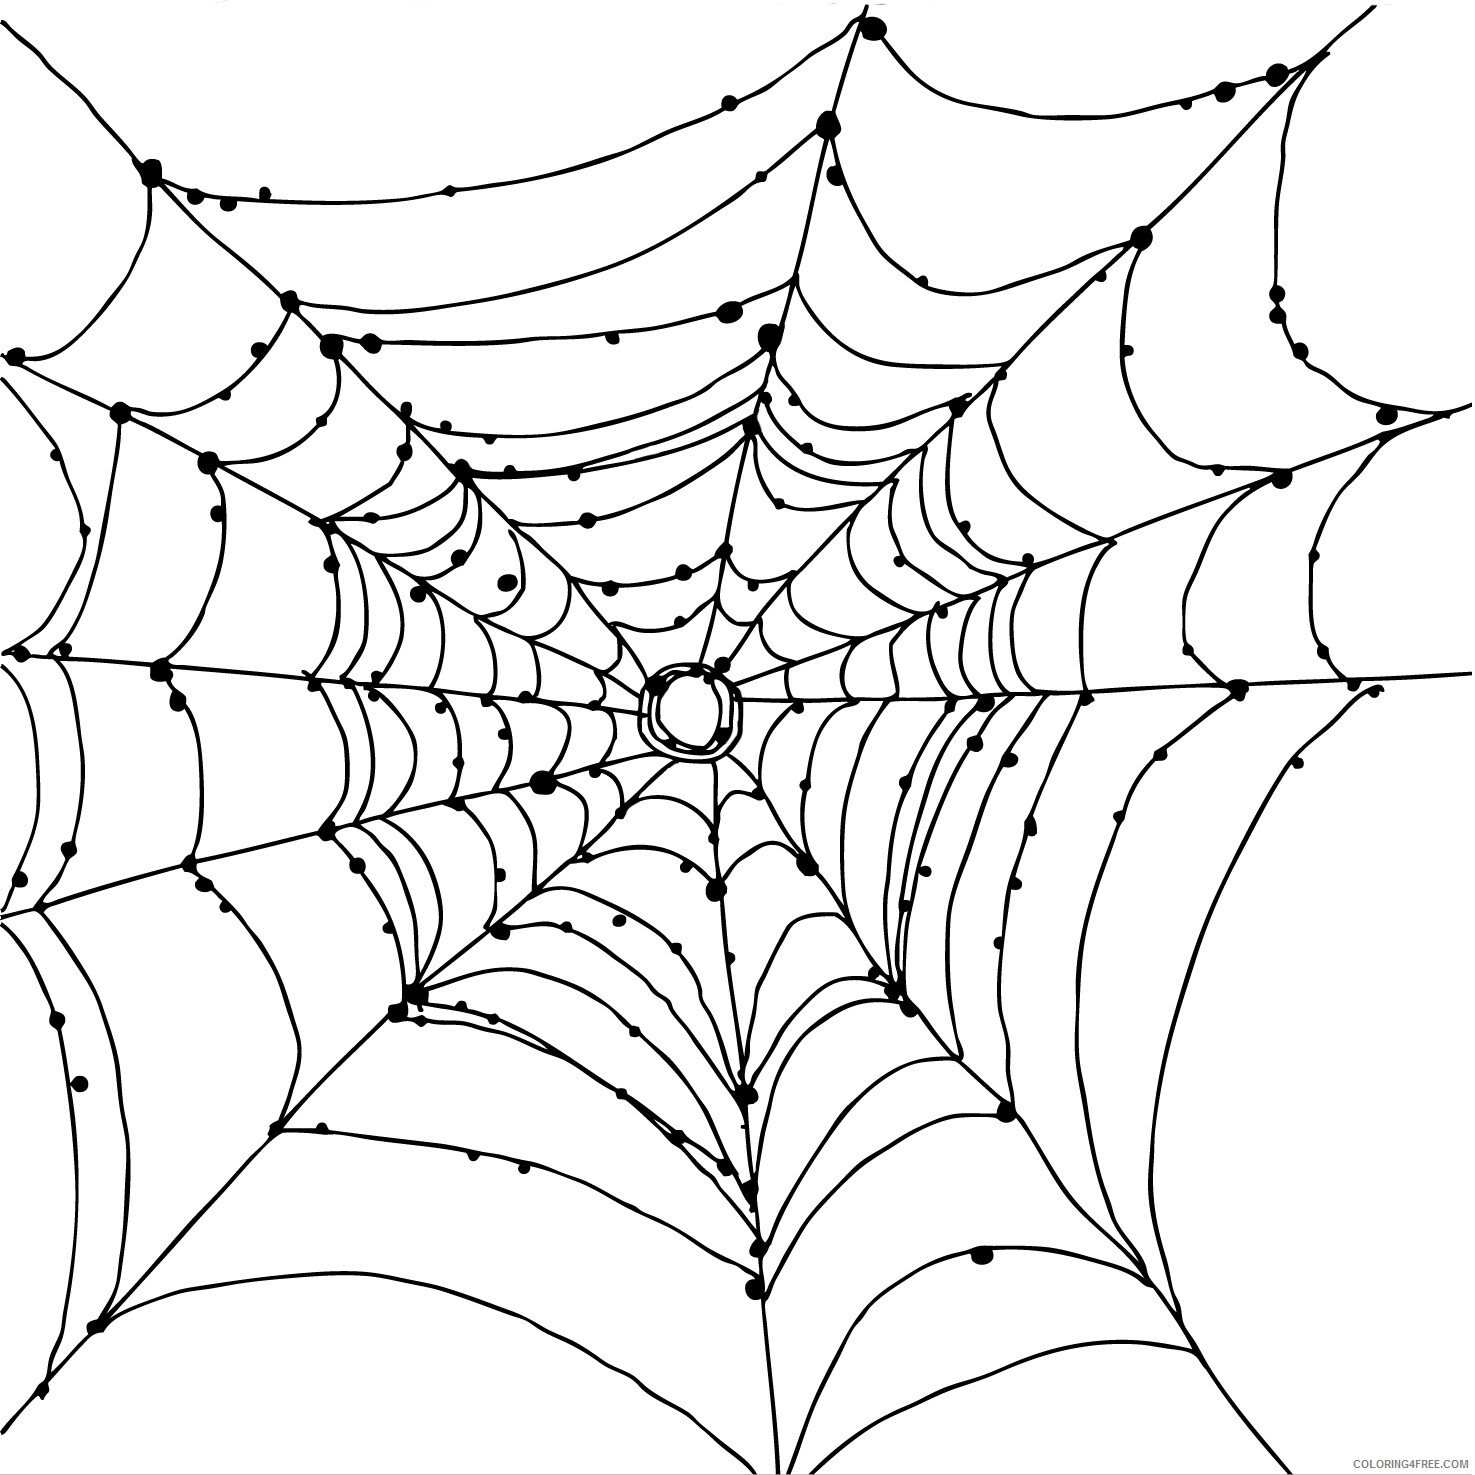 Spider Coloring Pages Animal Printable Sheets of Spider Web 2021 4615 Coloring4free